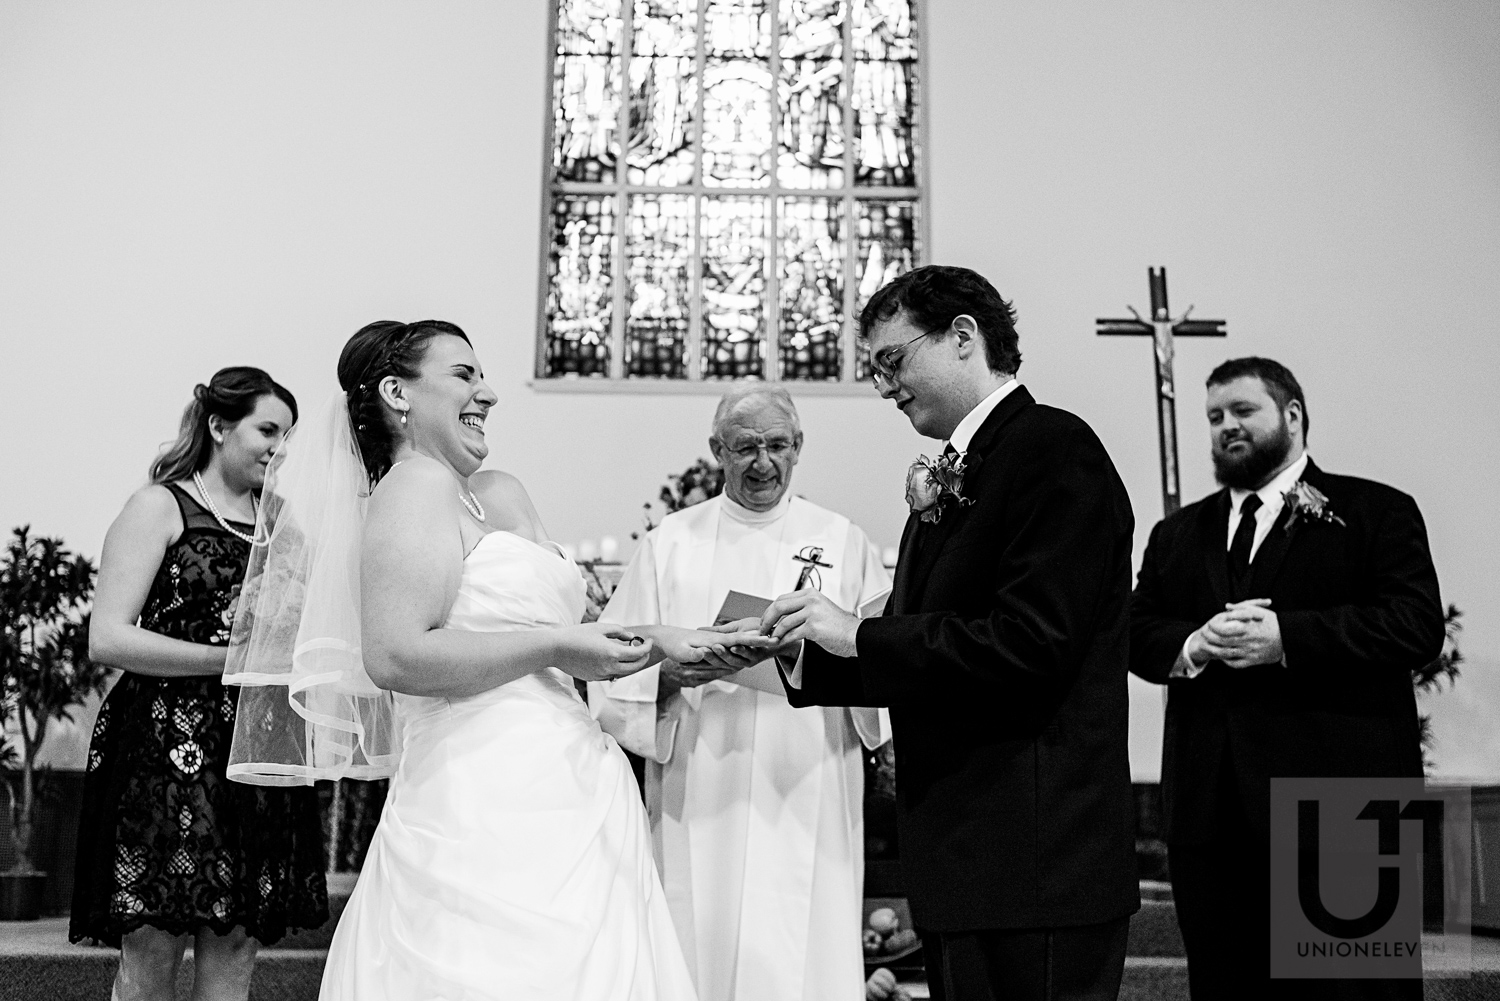 The bride and groom exchanging their wedding rings